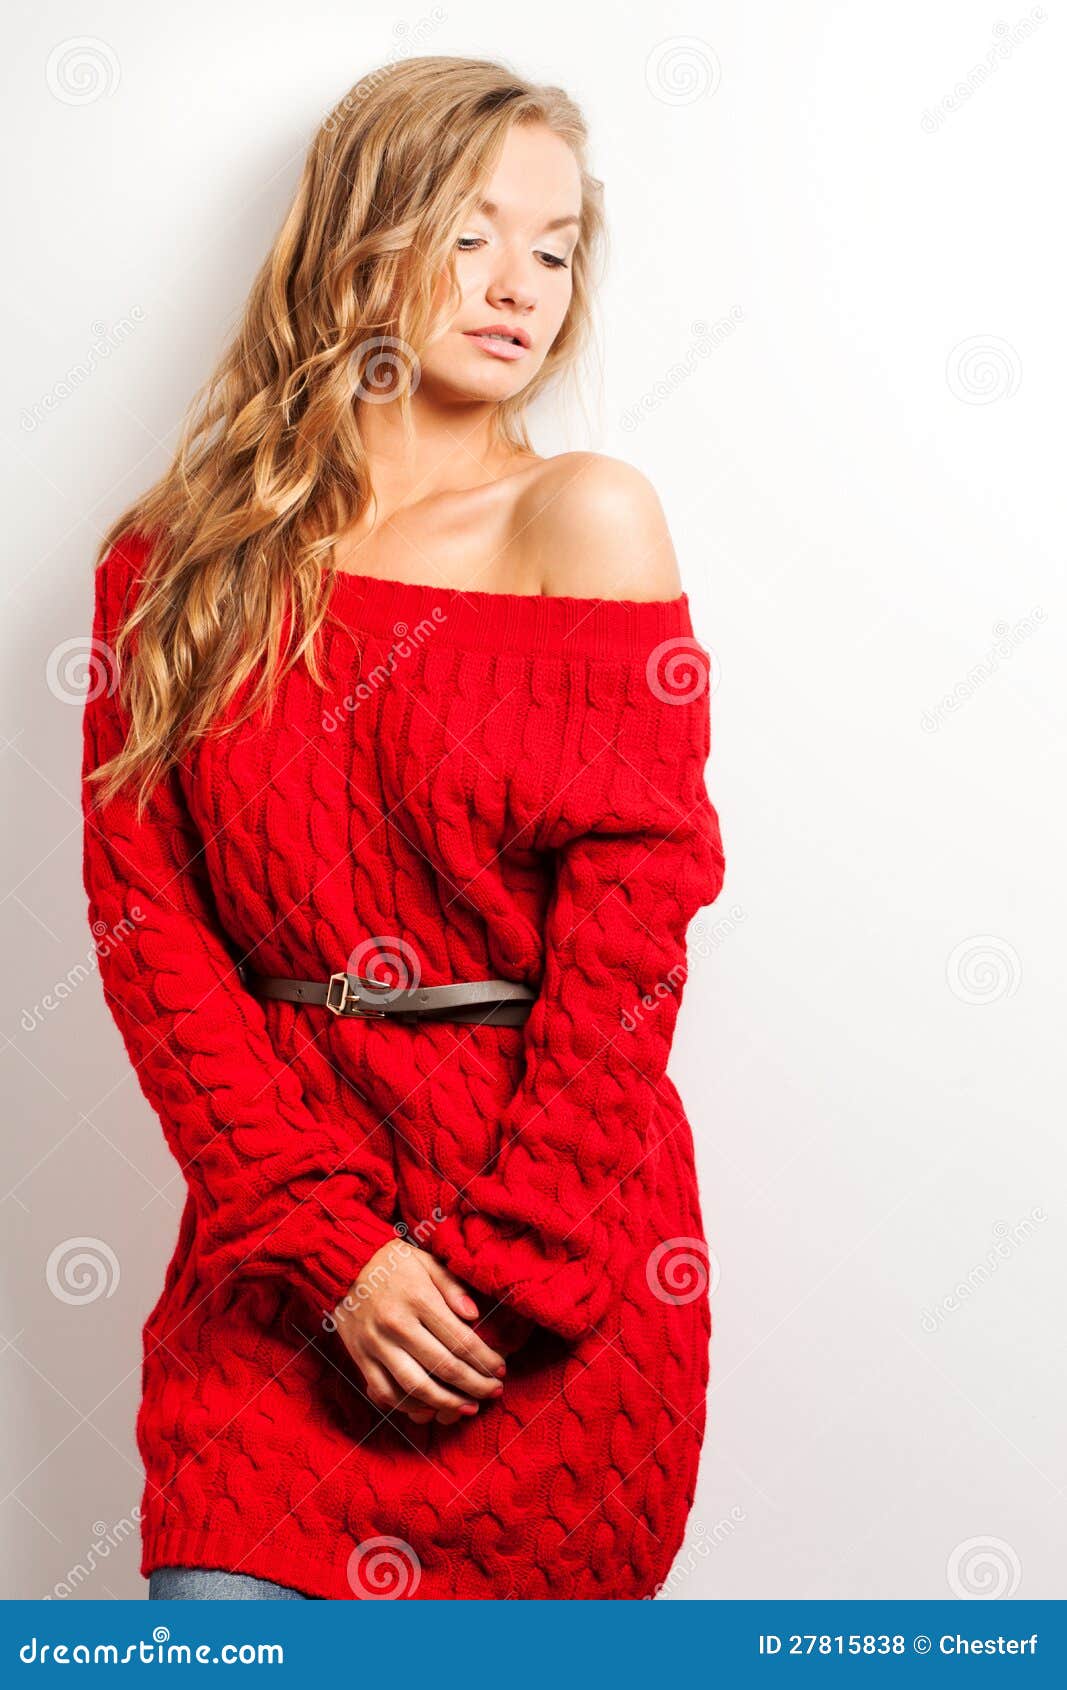 Blonde Woman with Wearing Red Dress Stock Photo - Image of caucasian ...